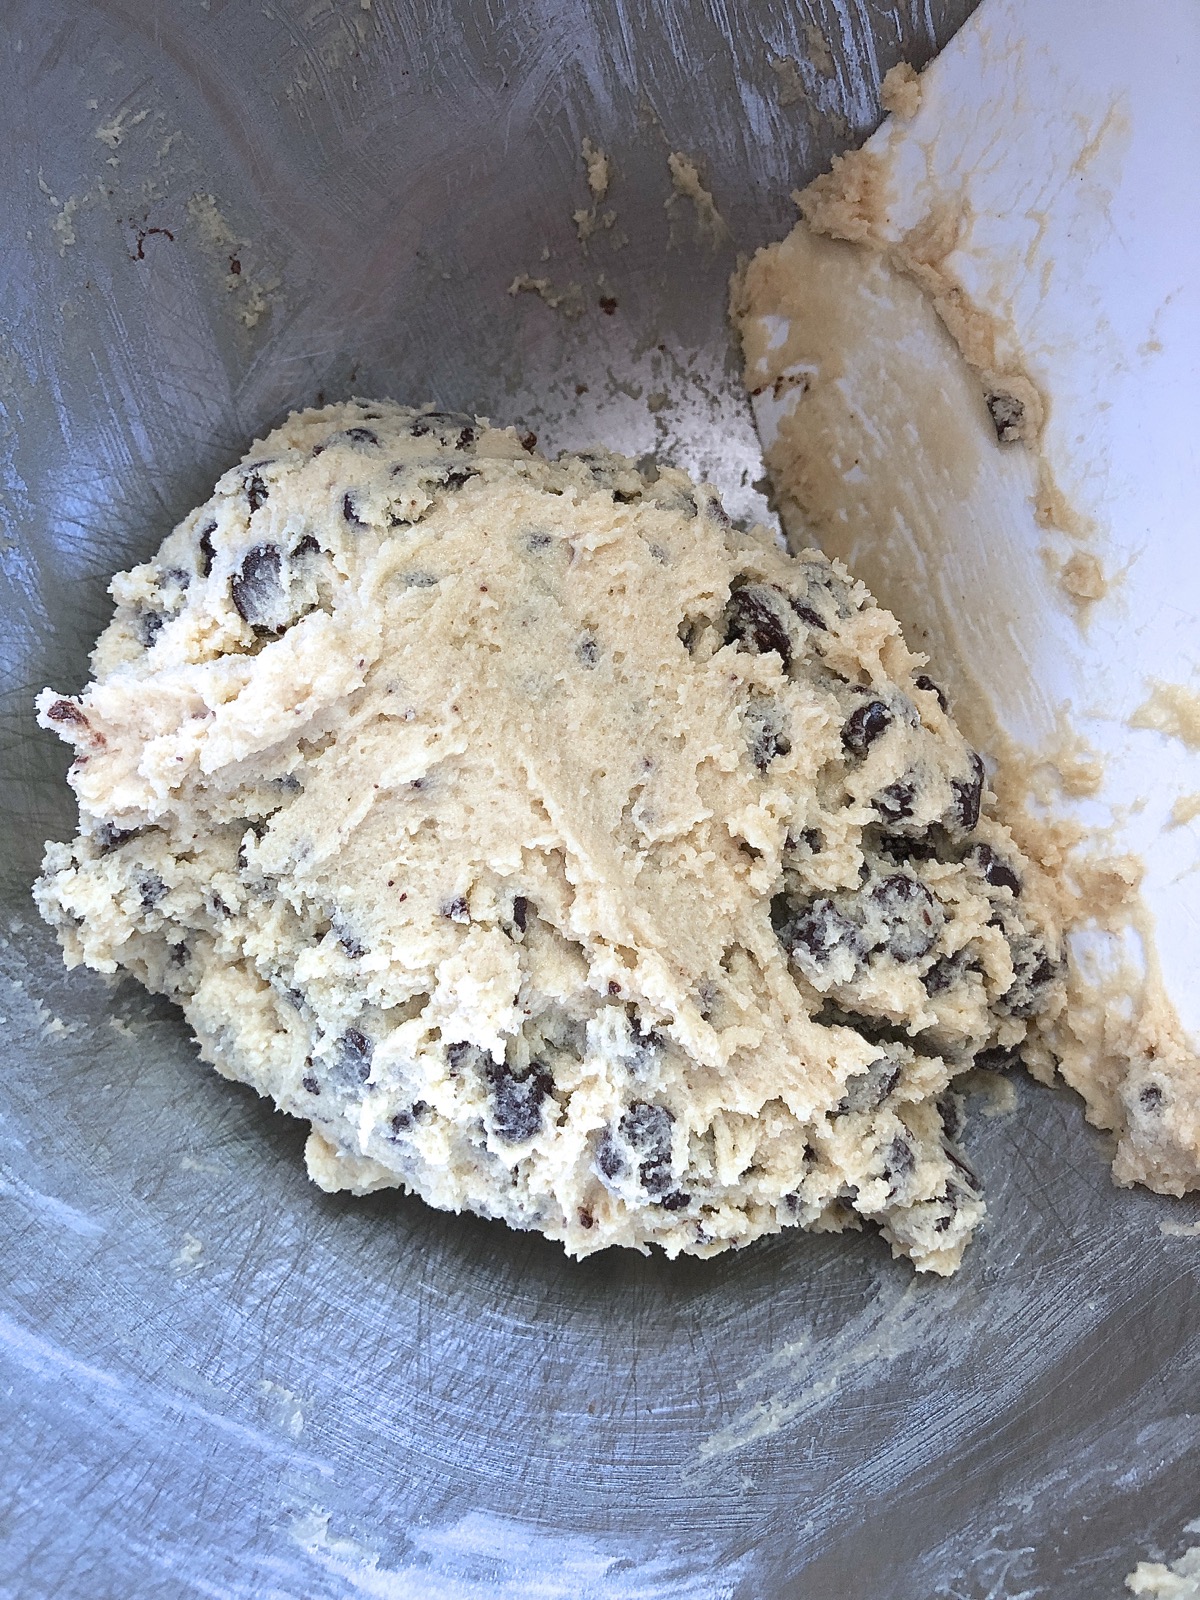 Chocolate chip cookie dough scraped into a ball in the center of the mixing bowl.